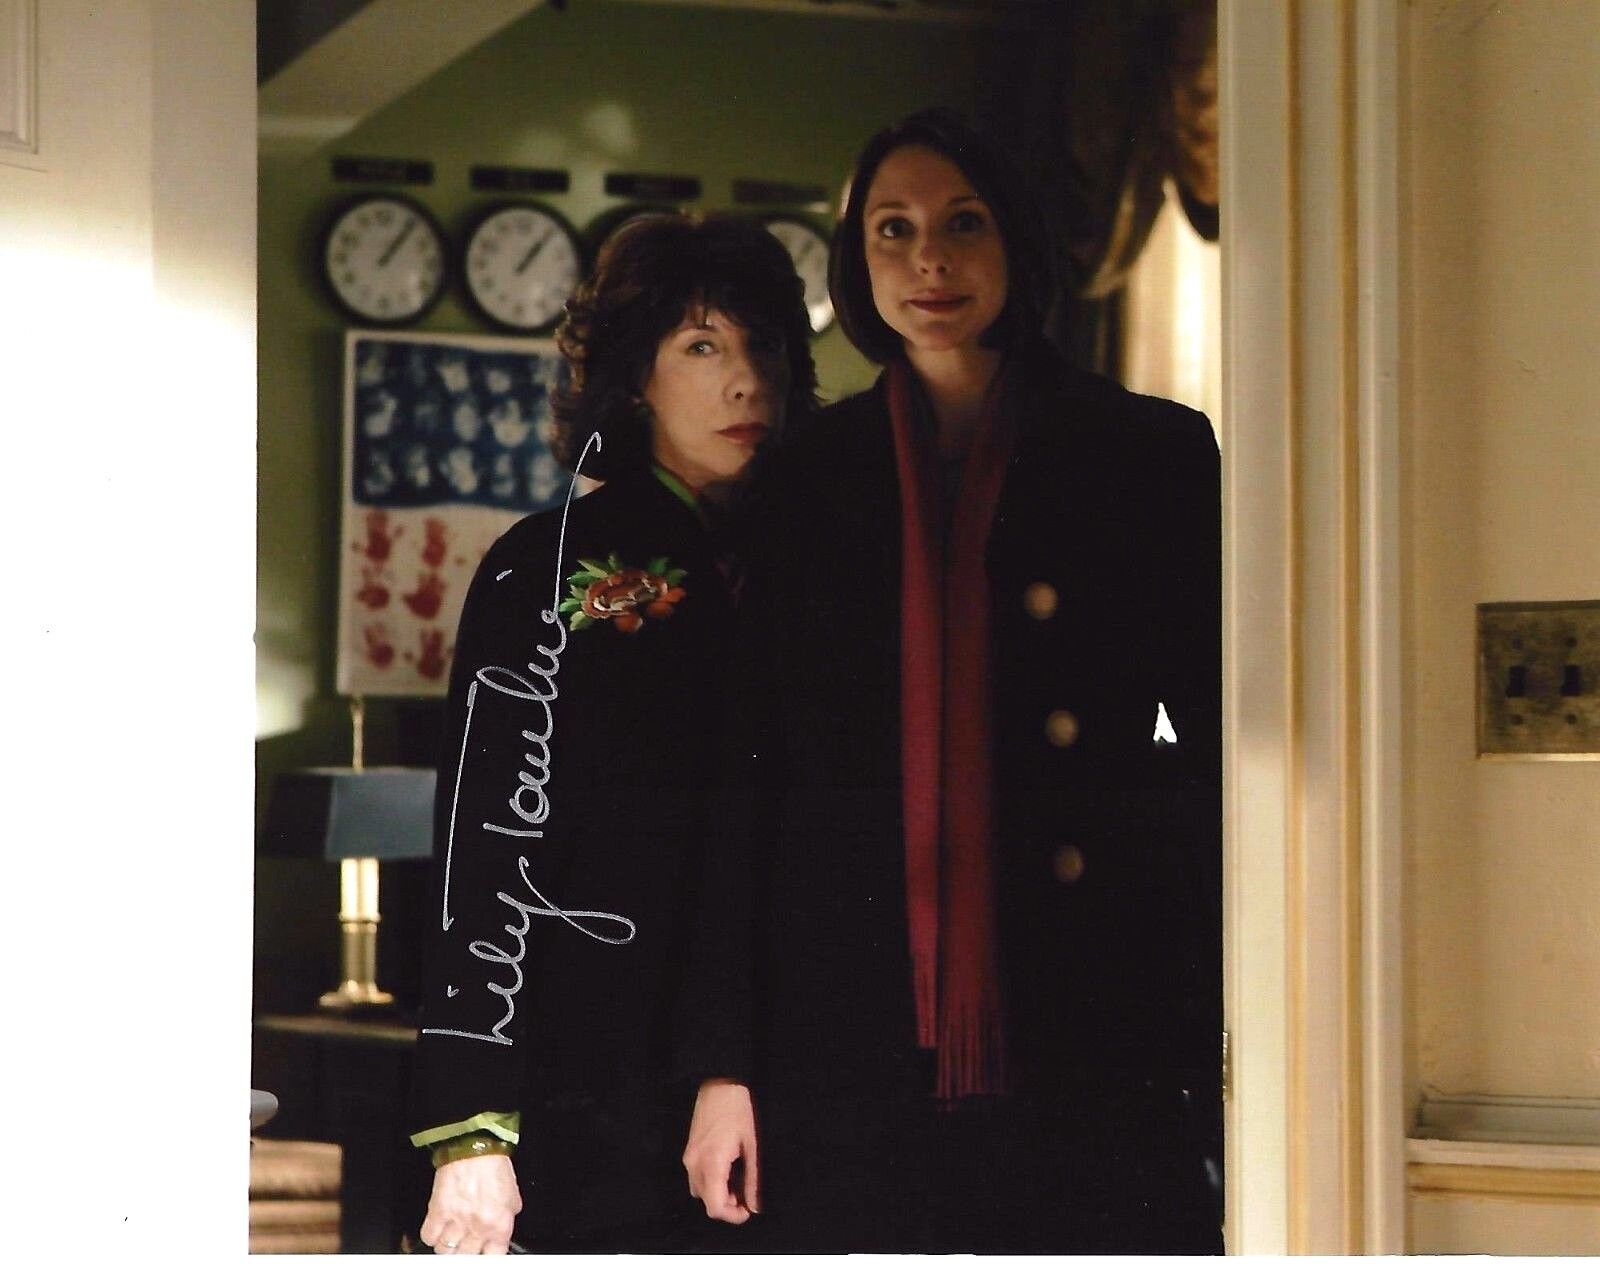 ACTRESS LILY TOMLIN HAND SIGNED THE WEST WING 8X10 Photo Poster painting C W/COA DEBBIE FIDERER